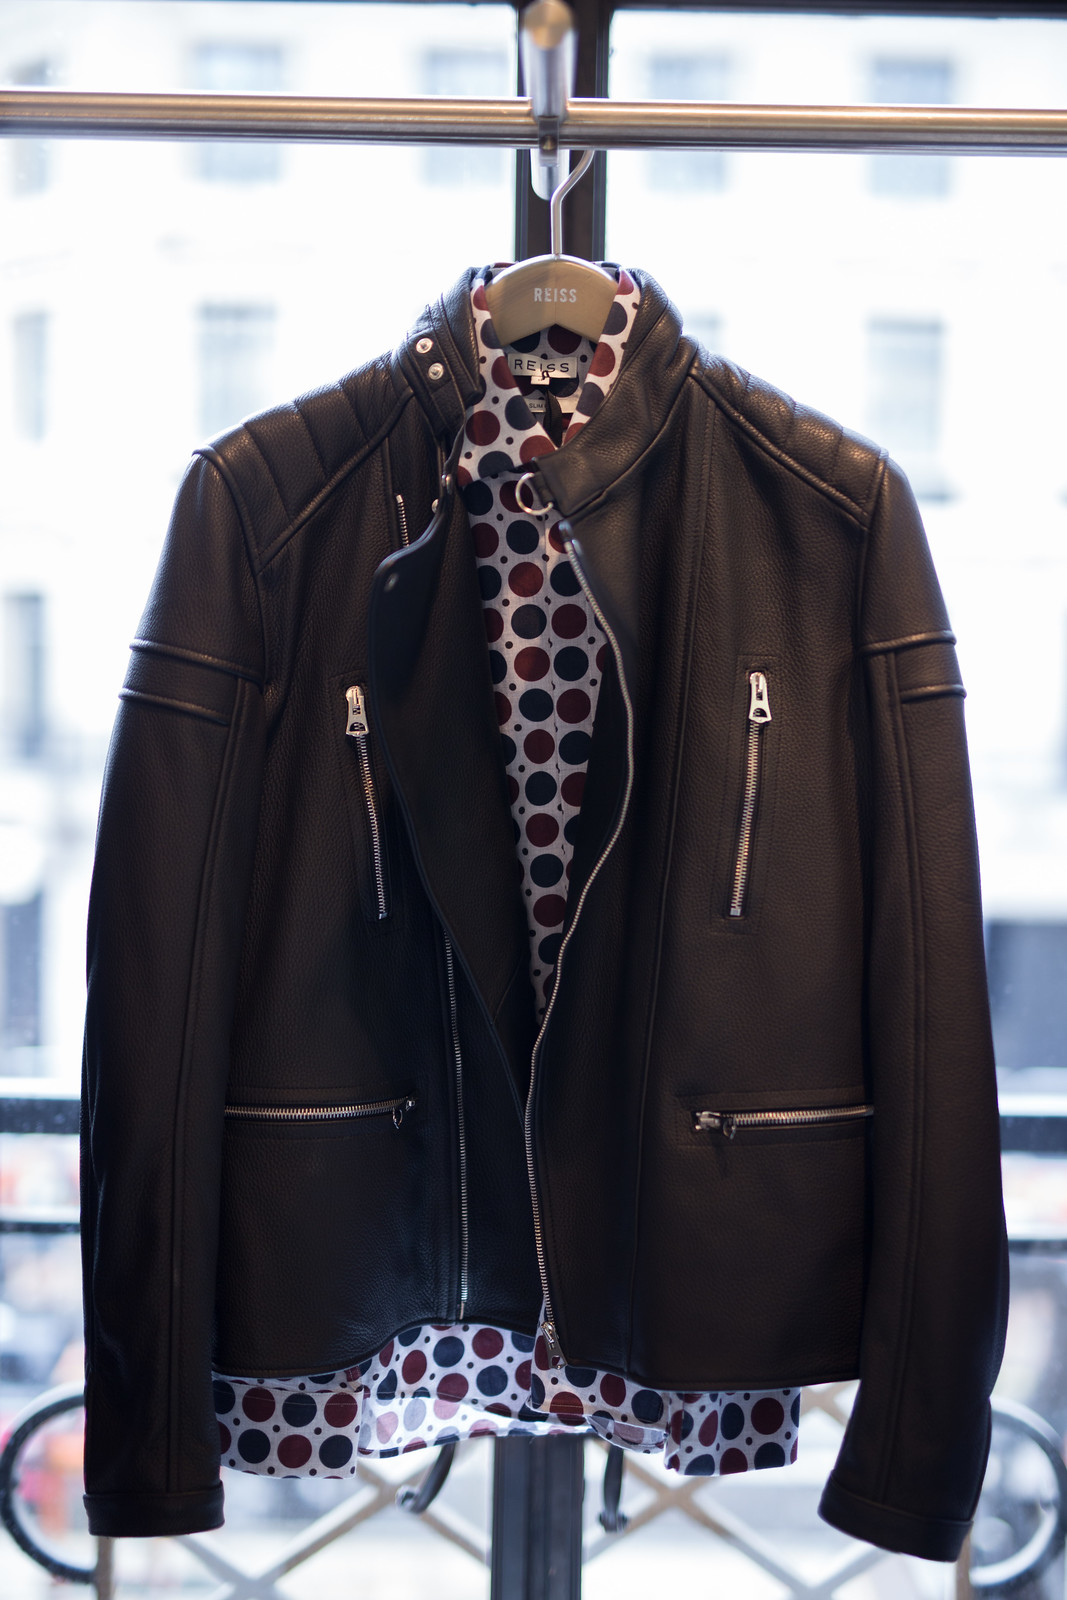 Reiss AW15 Personal Styling